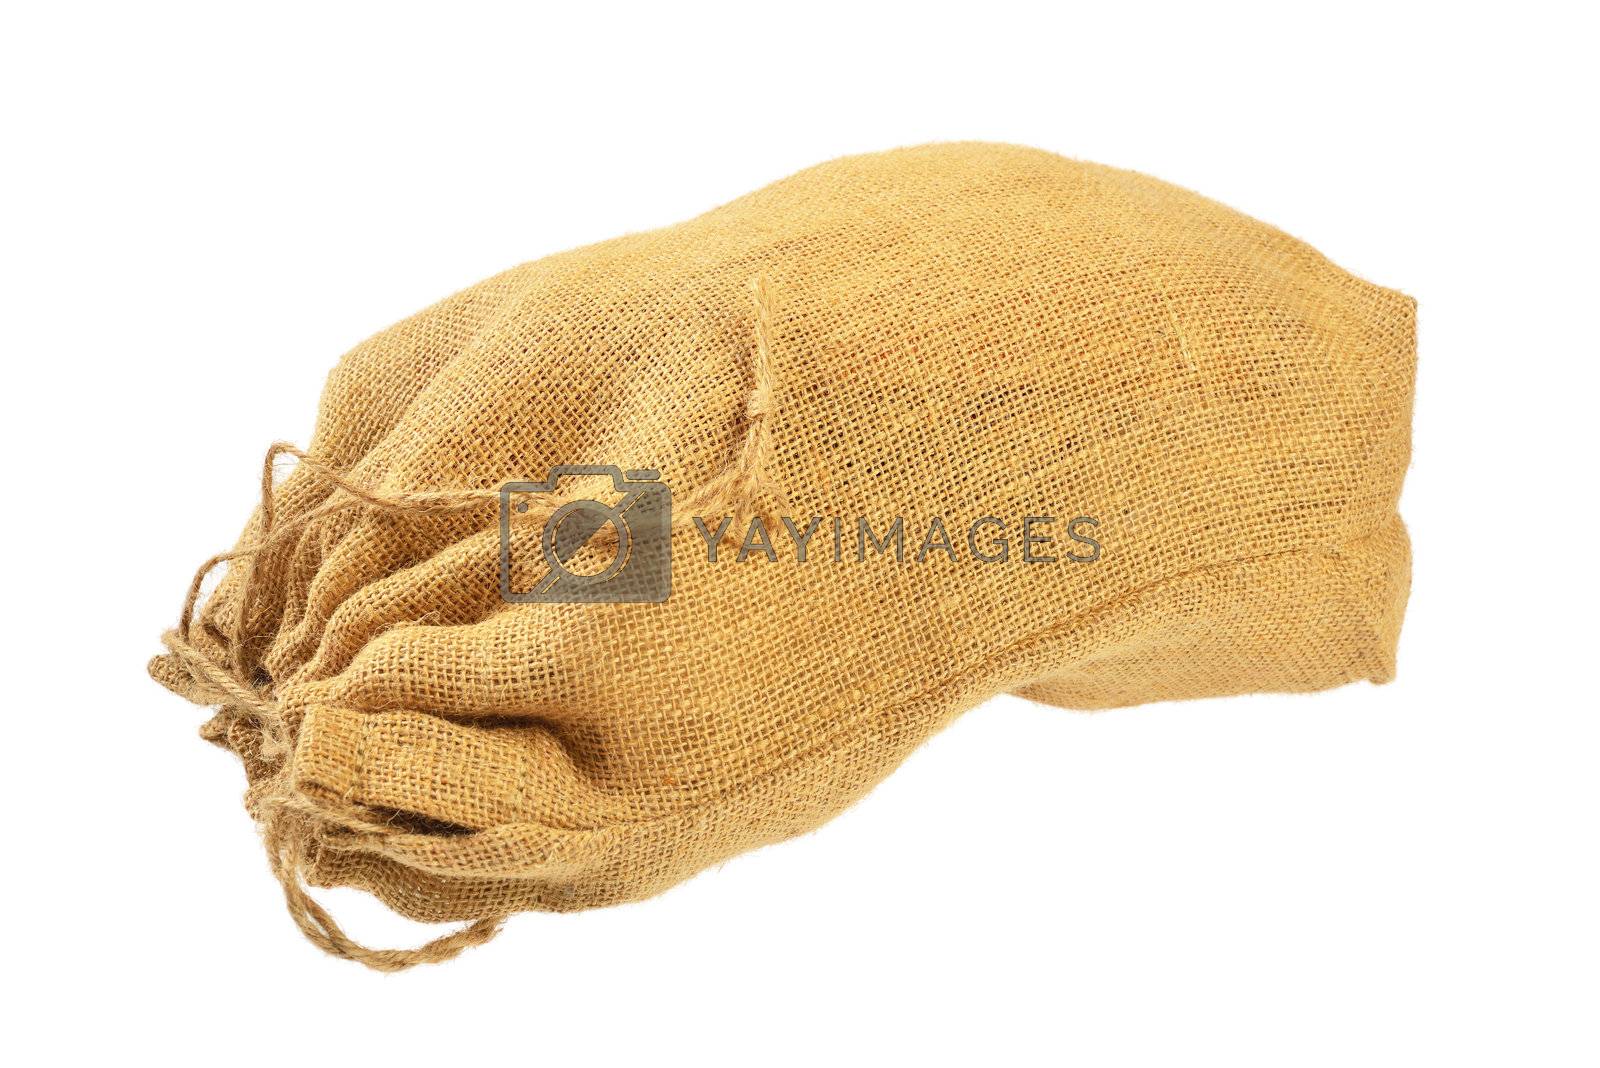 Royalty free image of Cloth bag with drawstrings by grauvision